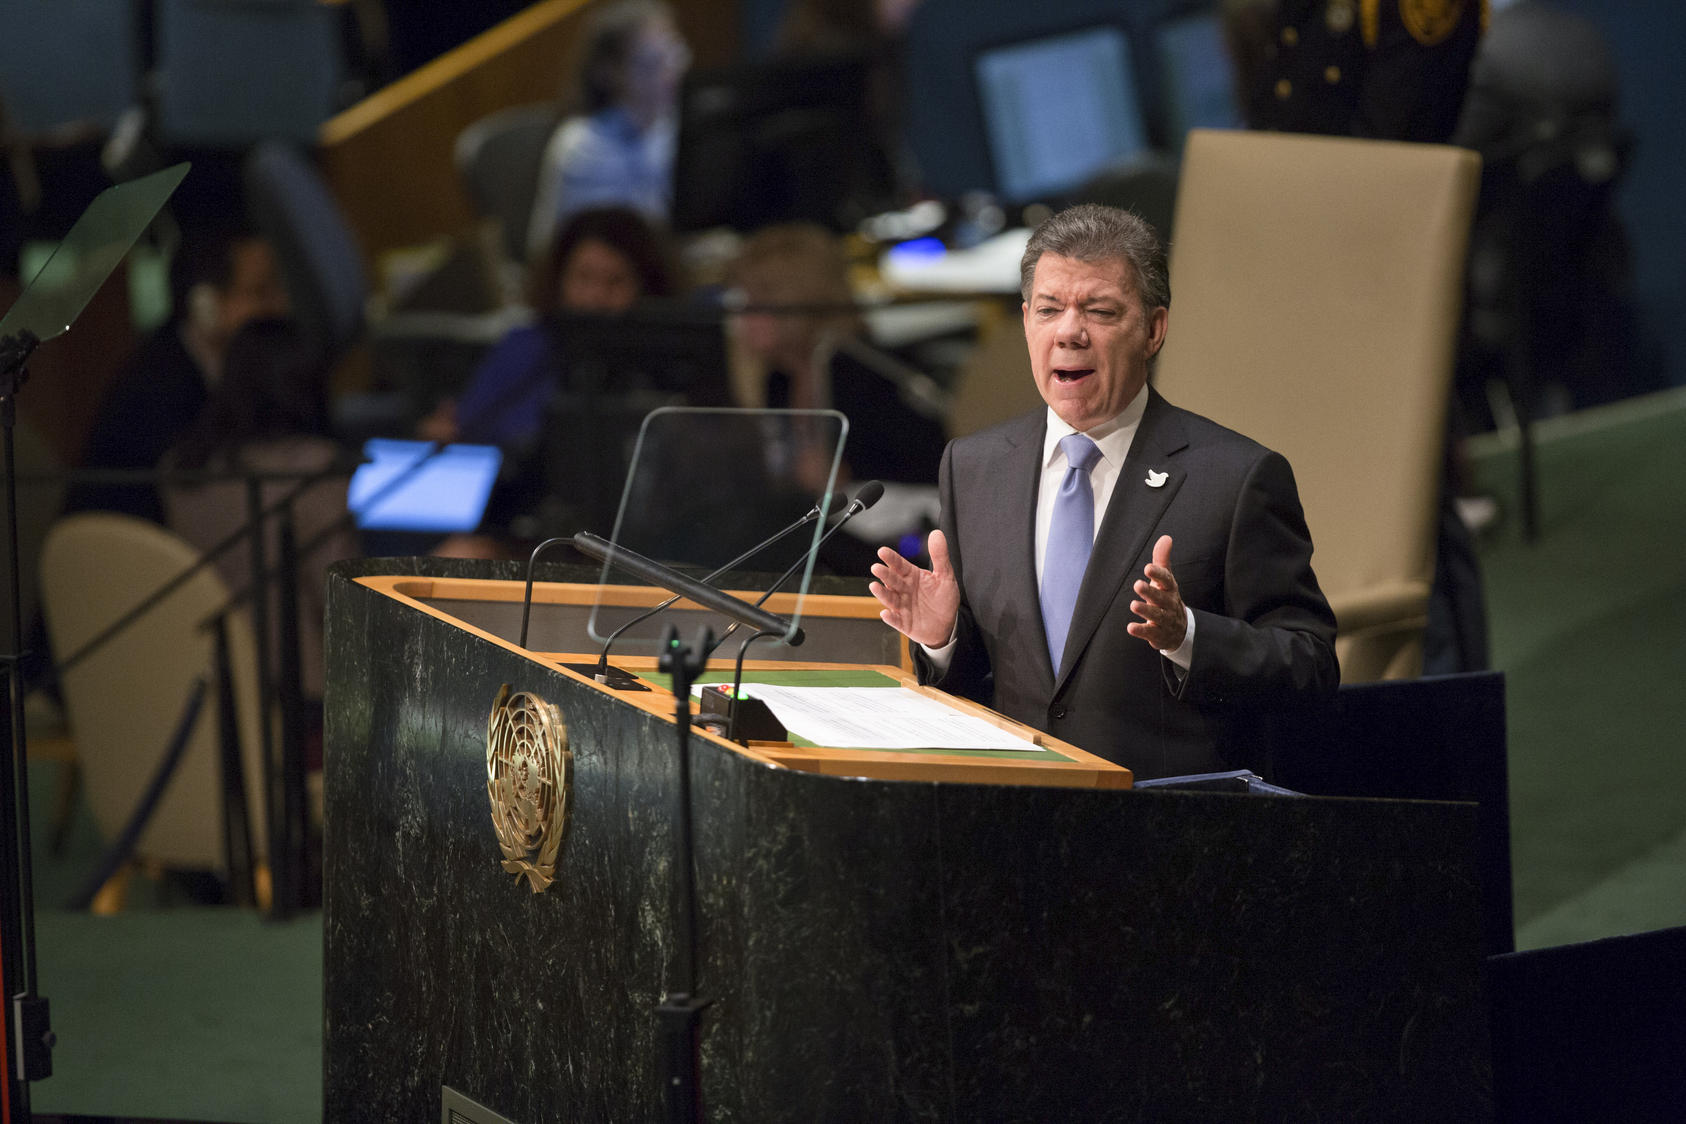 Colombian President Juan Manuel Santos delivers an address at the United Nations General Assembly, Sept. 29, 2015.